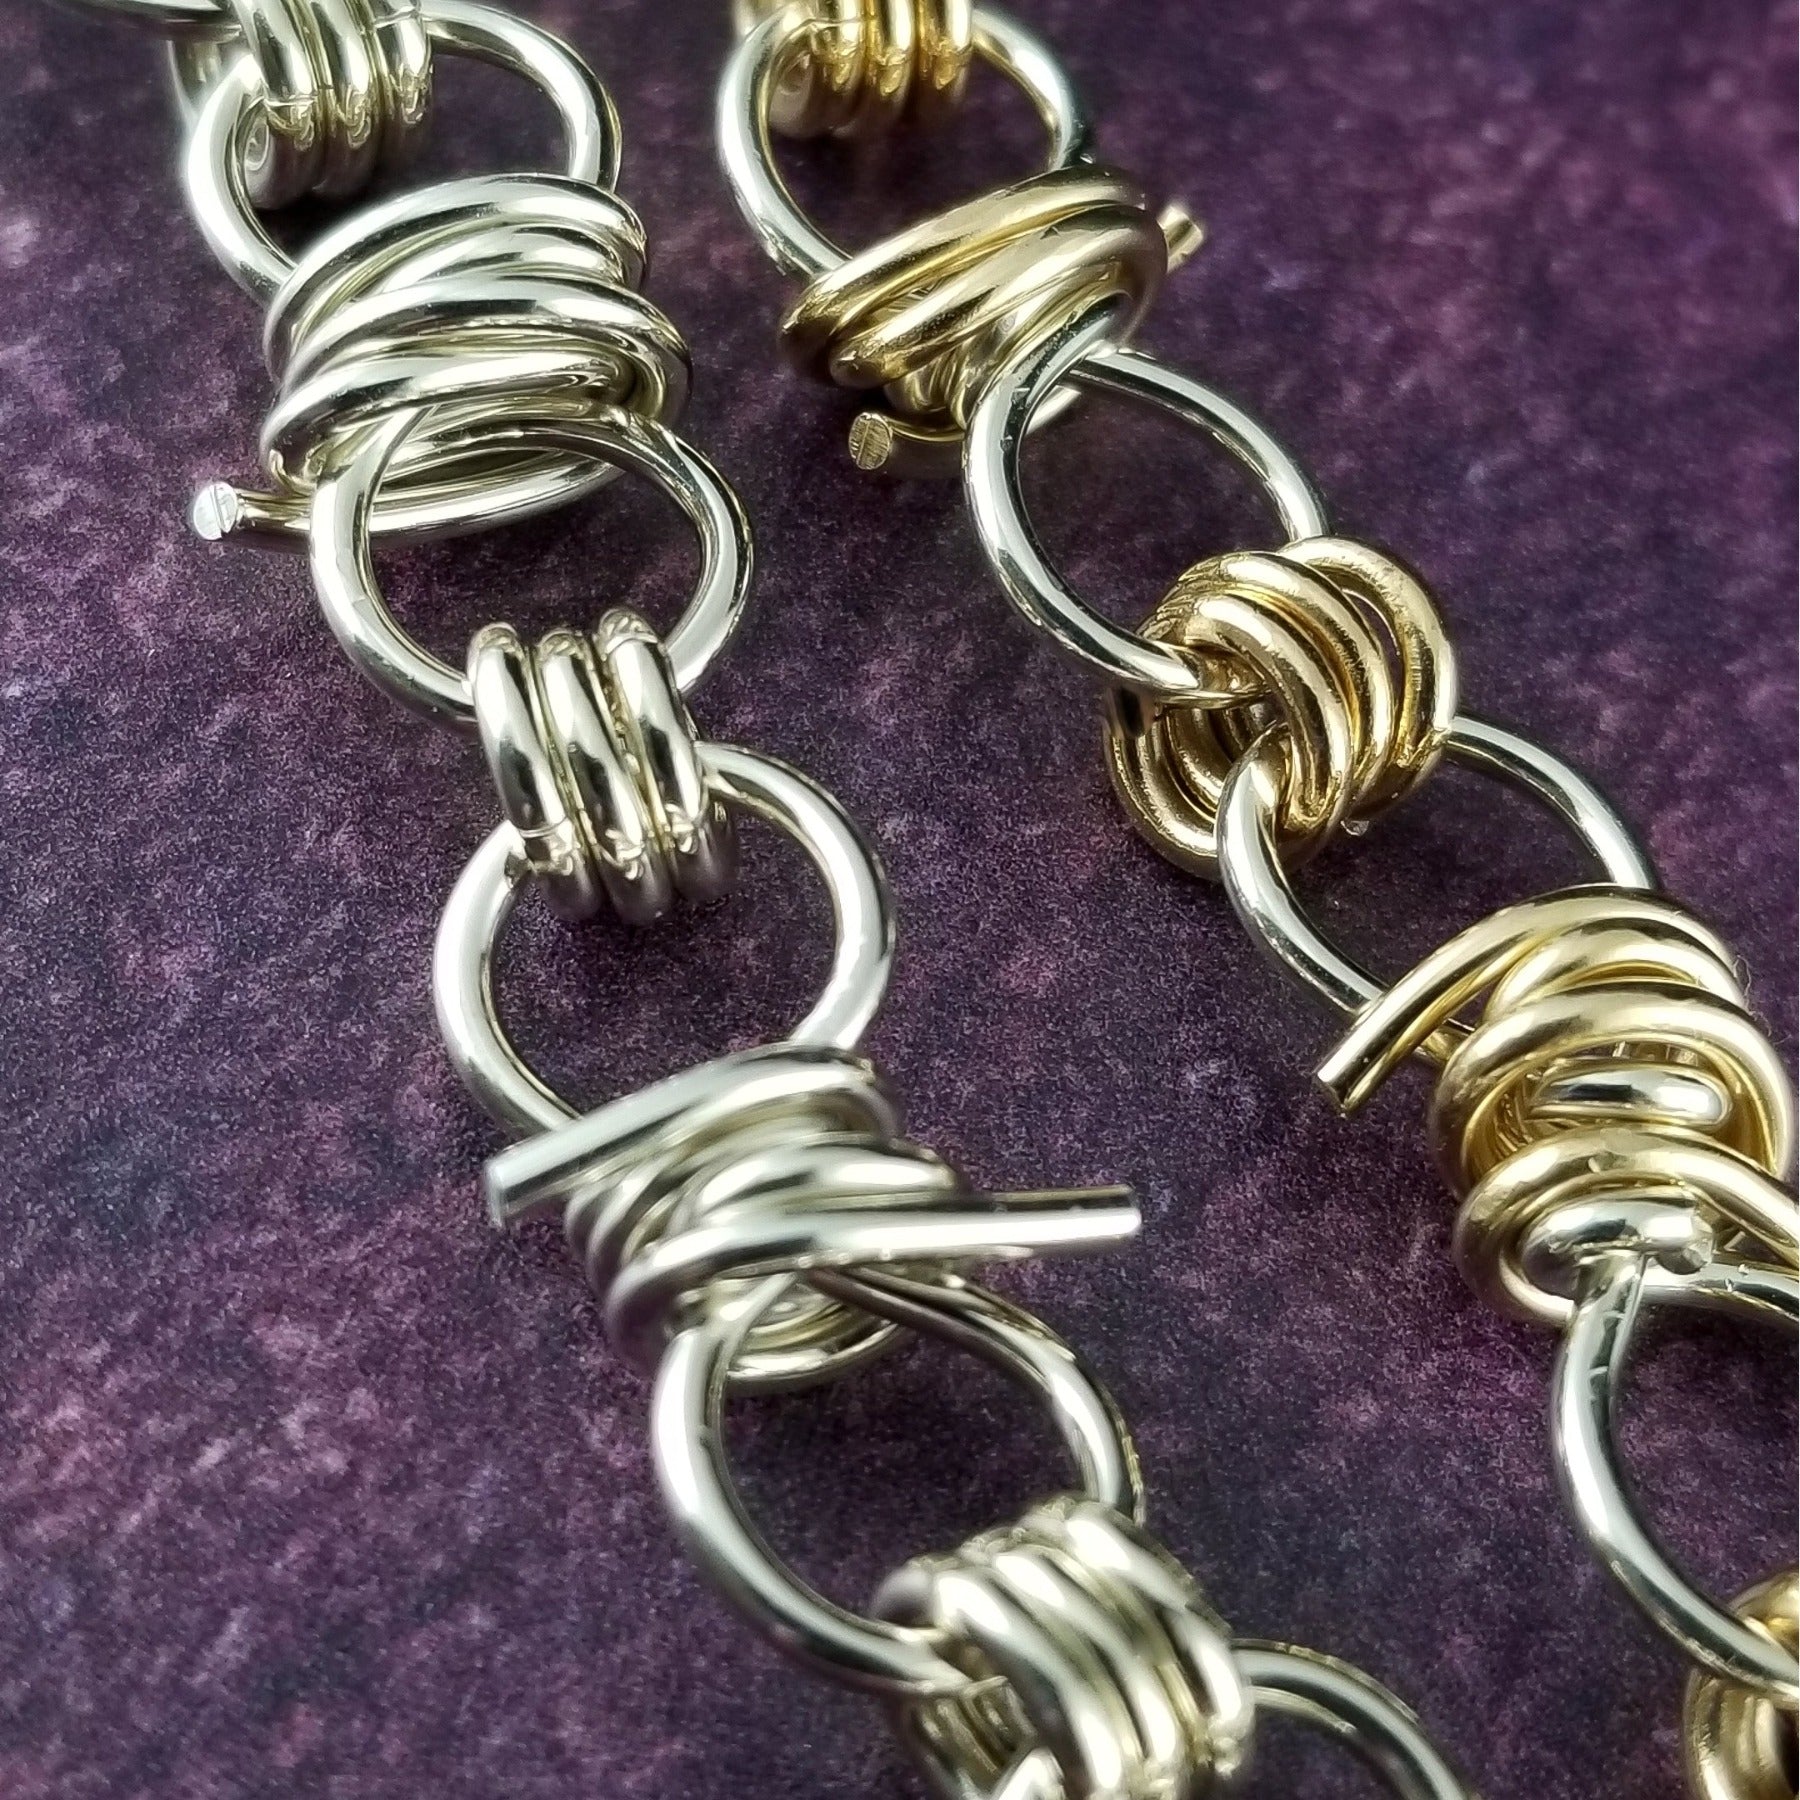 BRAMBLES Barbed Chain Bracelet / Anklet {Locking or Traditional}, Sterling  or Sterling and Gold